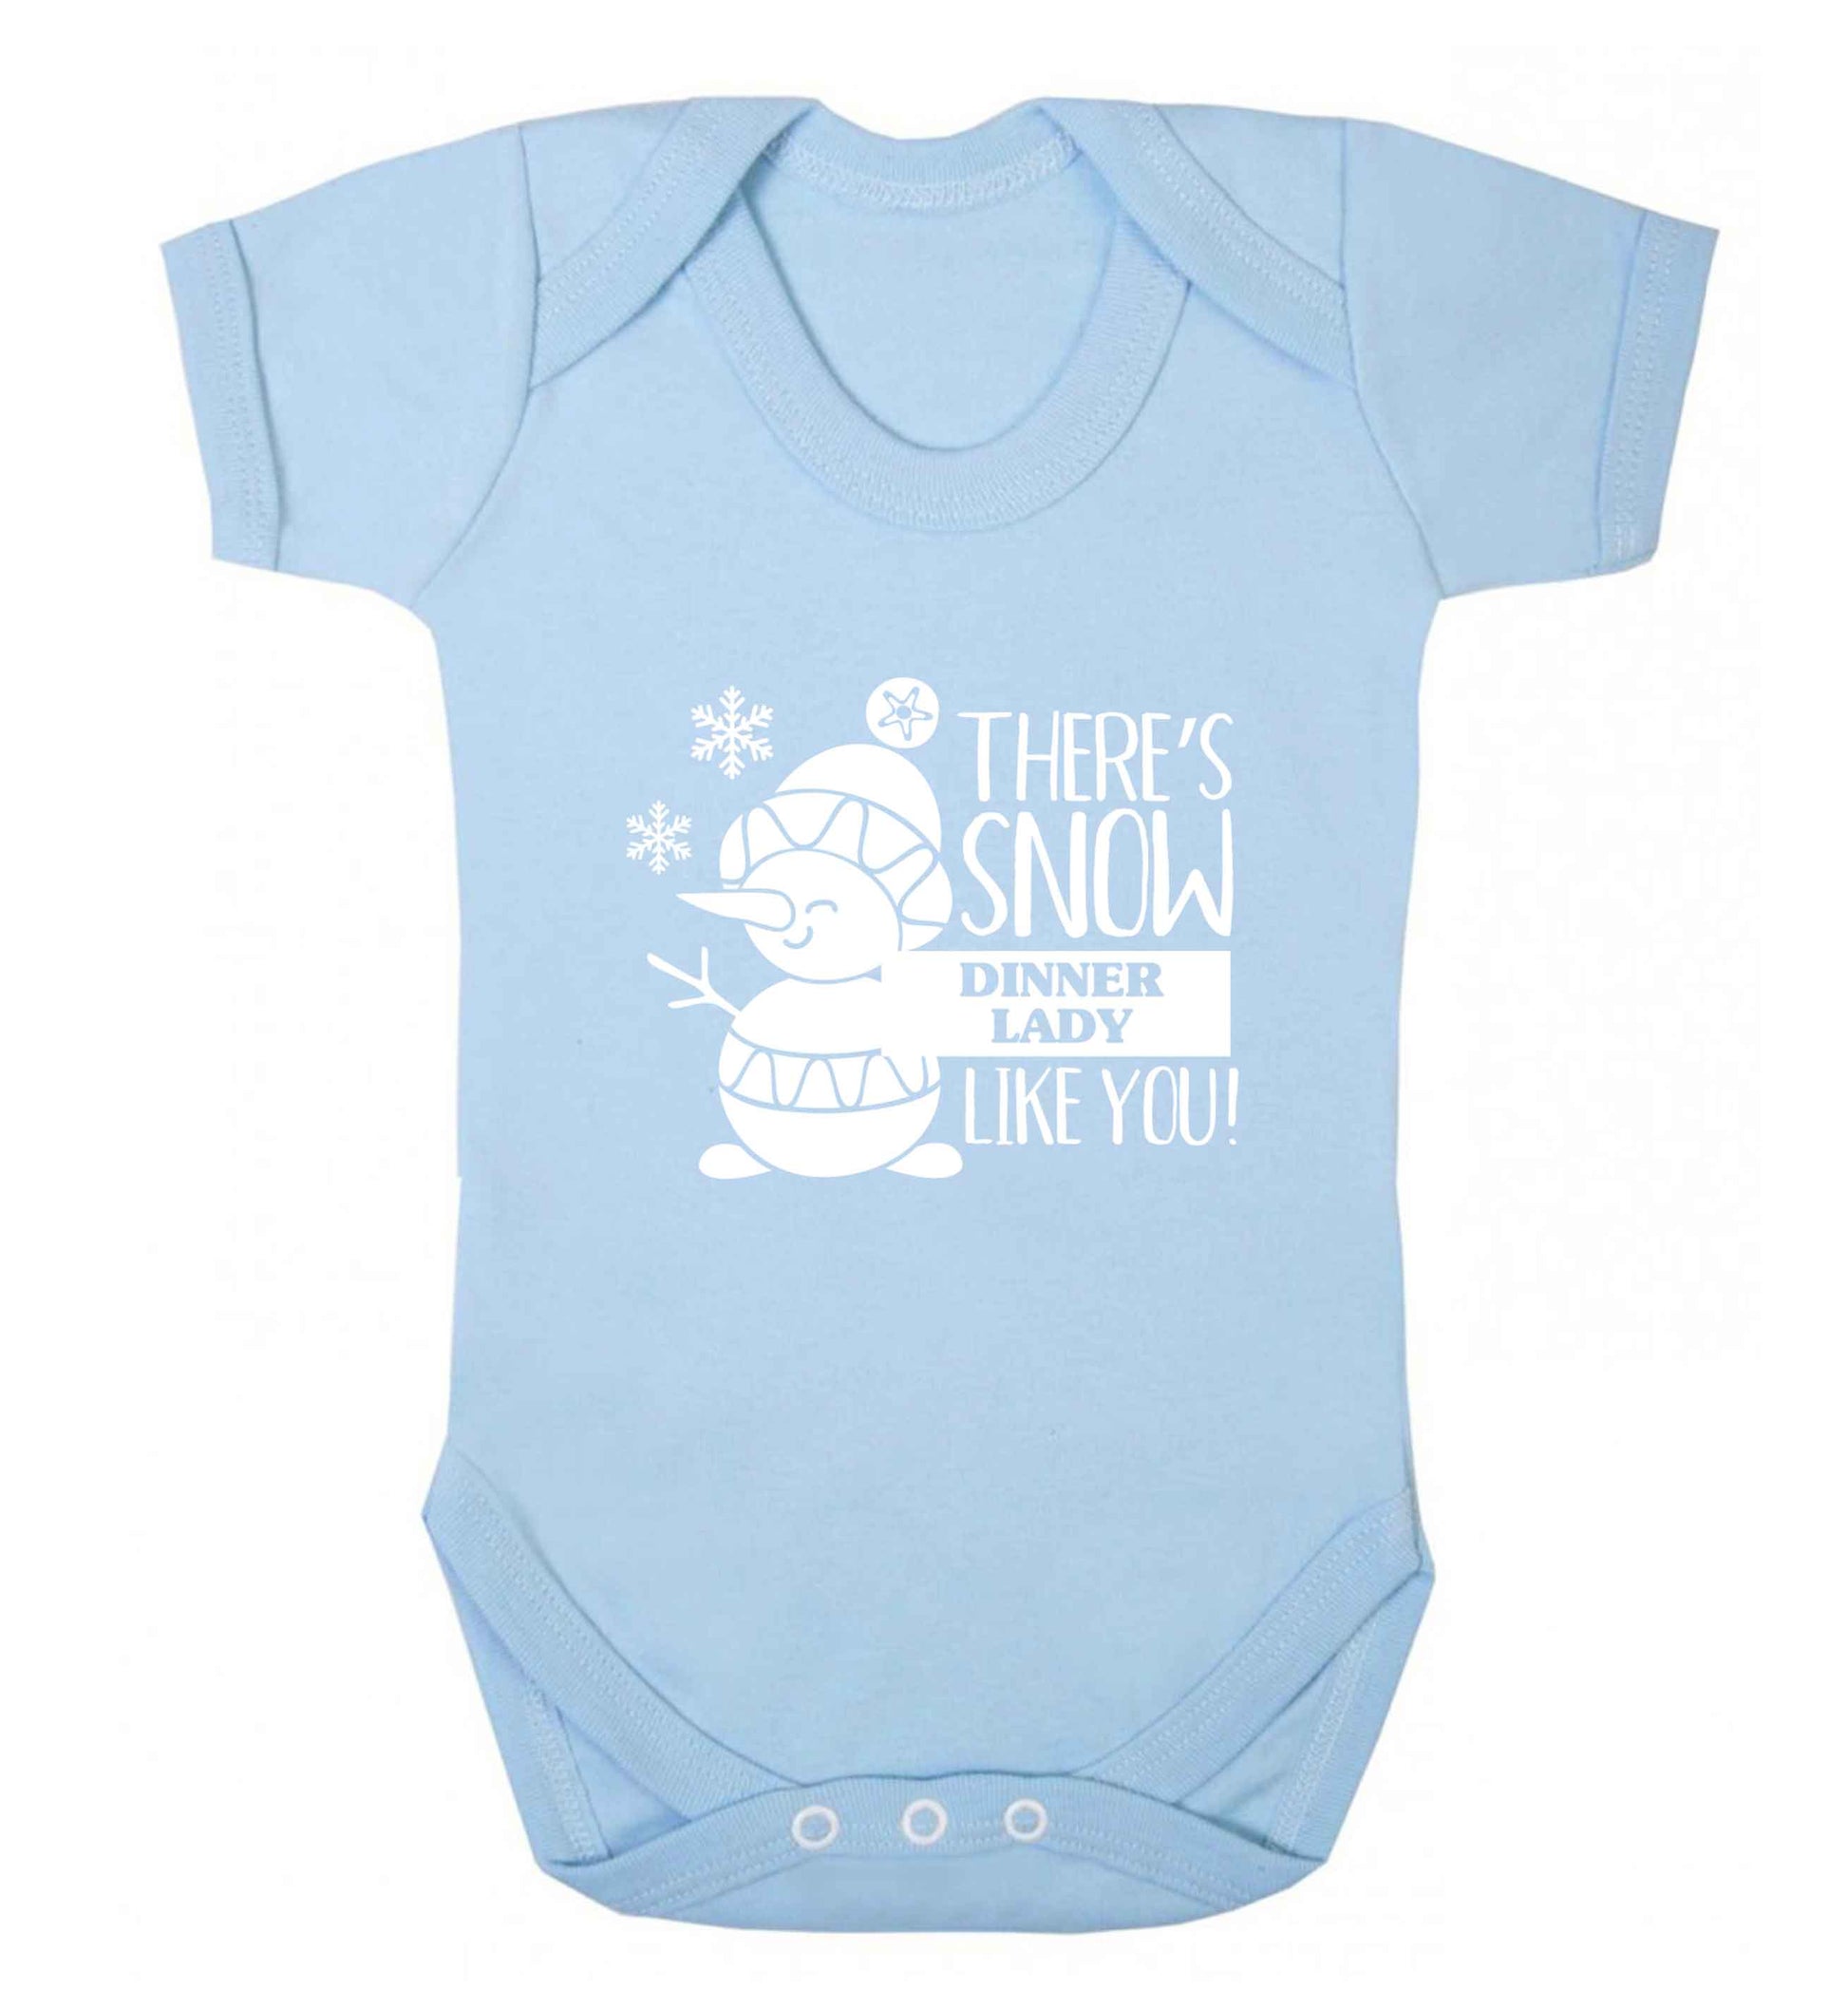 There's snow dinner lady like you baby vest pale blue 18-24 months